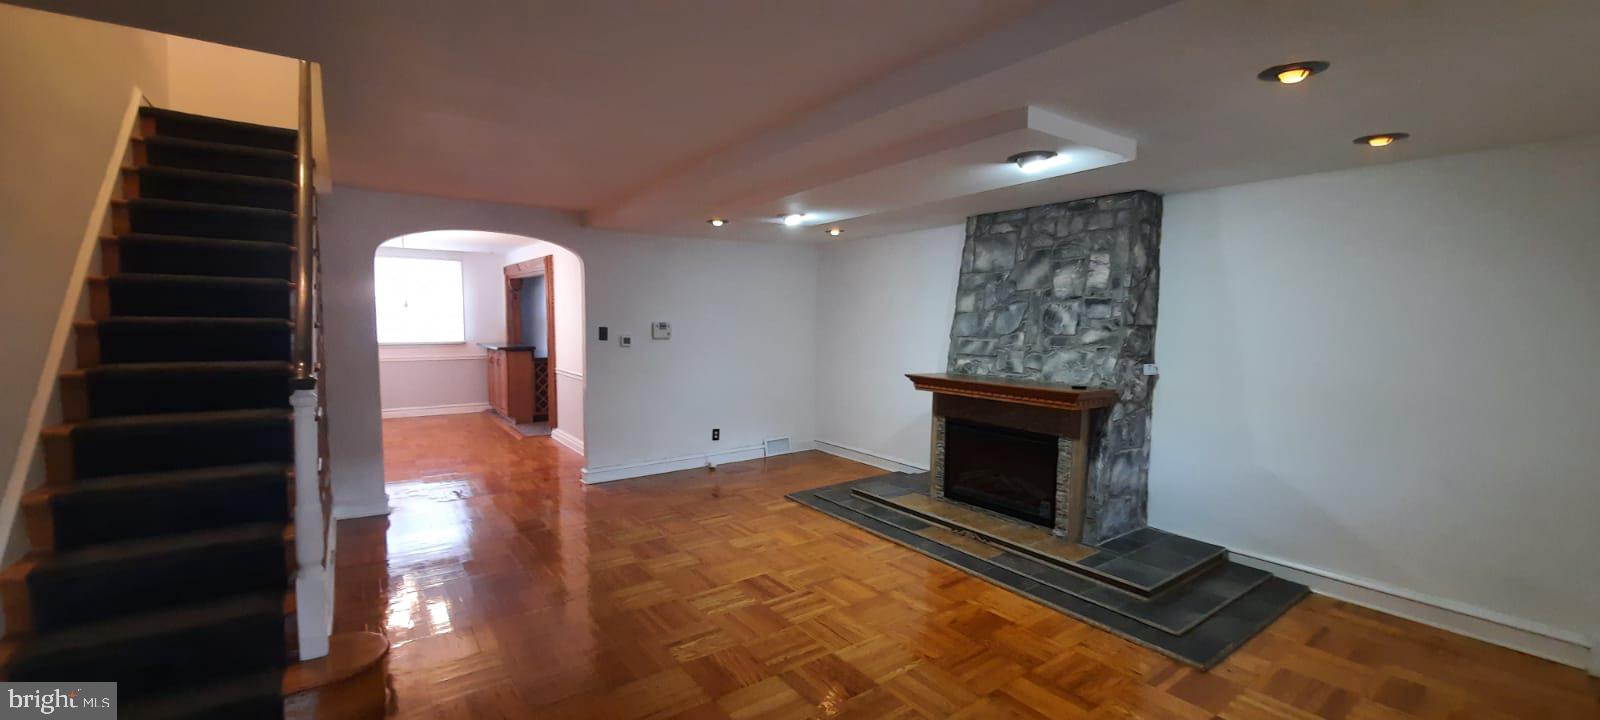 wooden floor in an empty room with a fireplace